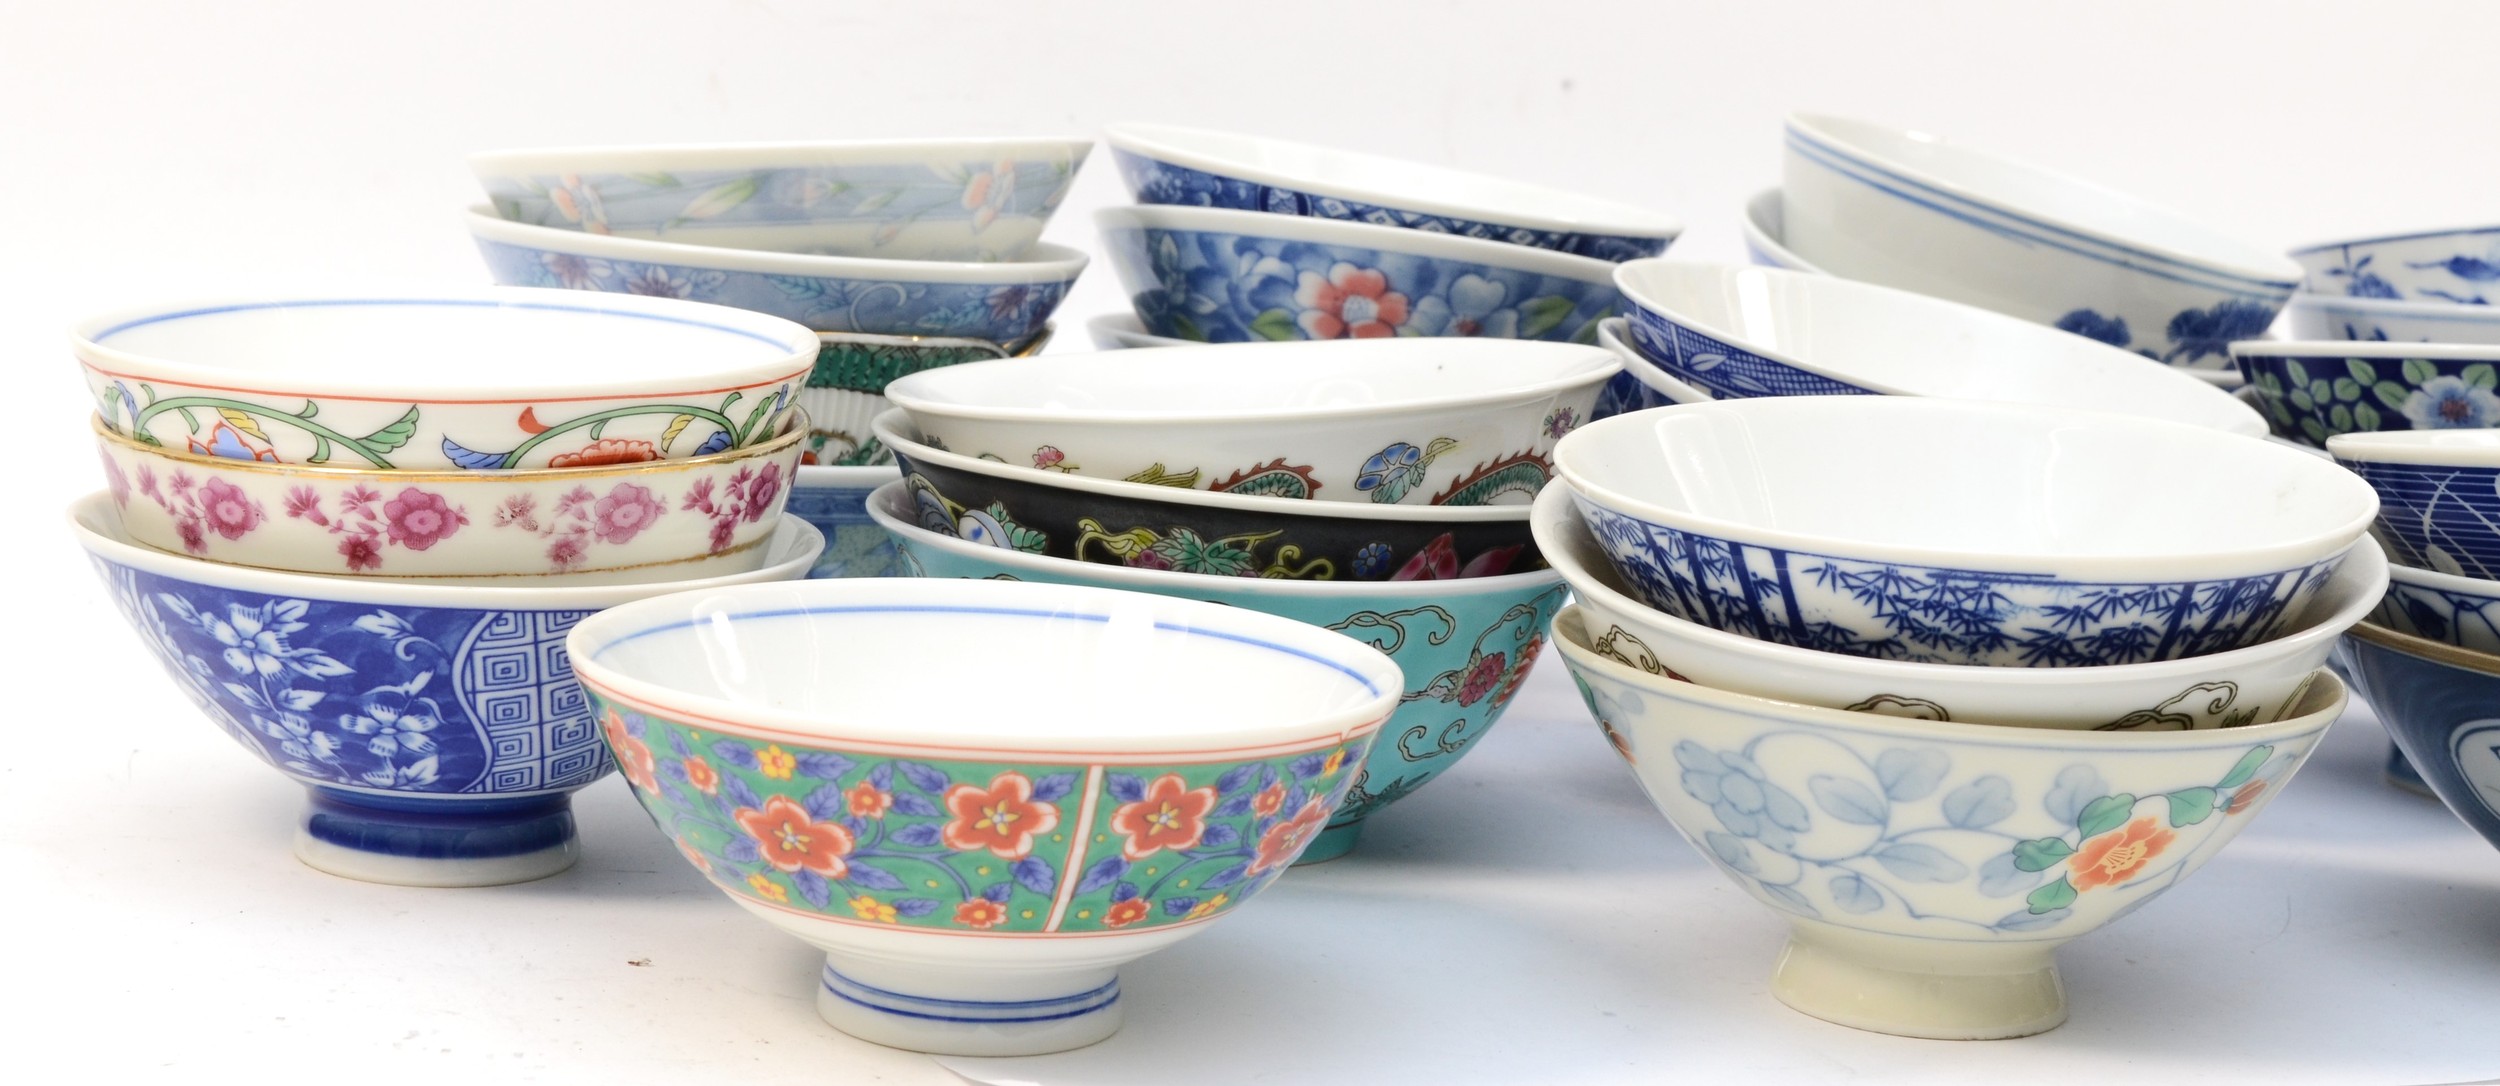 A collection of 20th century Chinese tea bowls. - Image 3 of 6